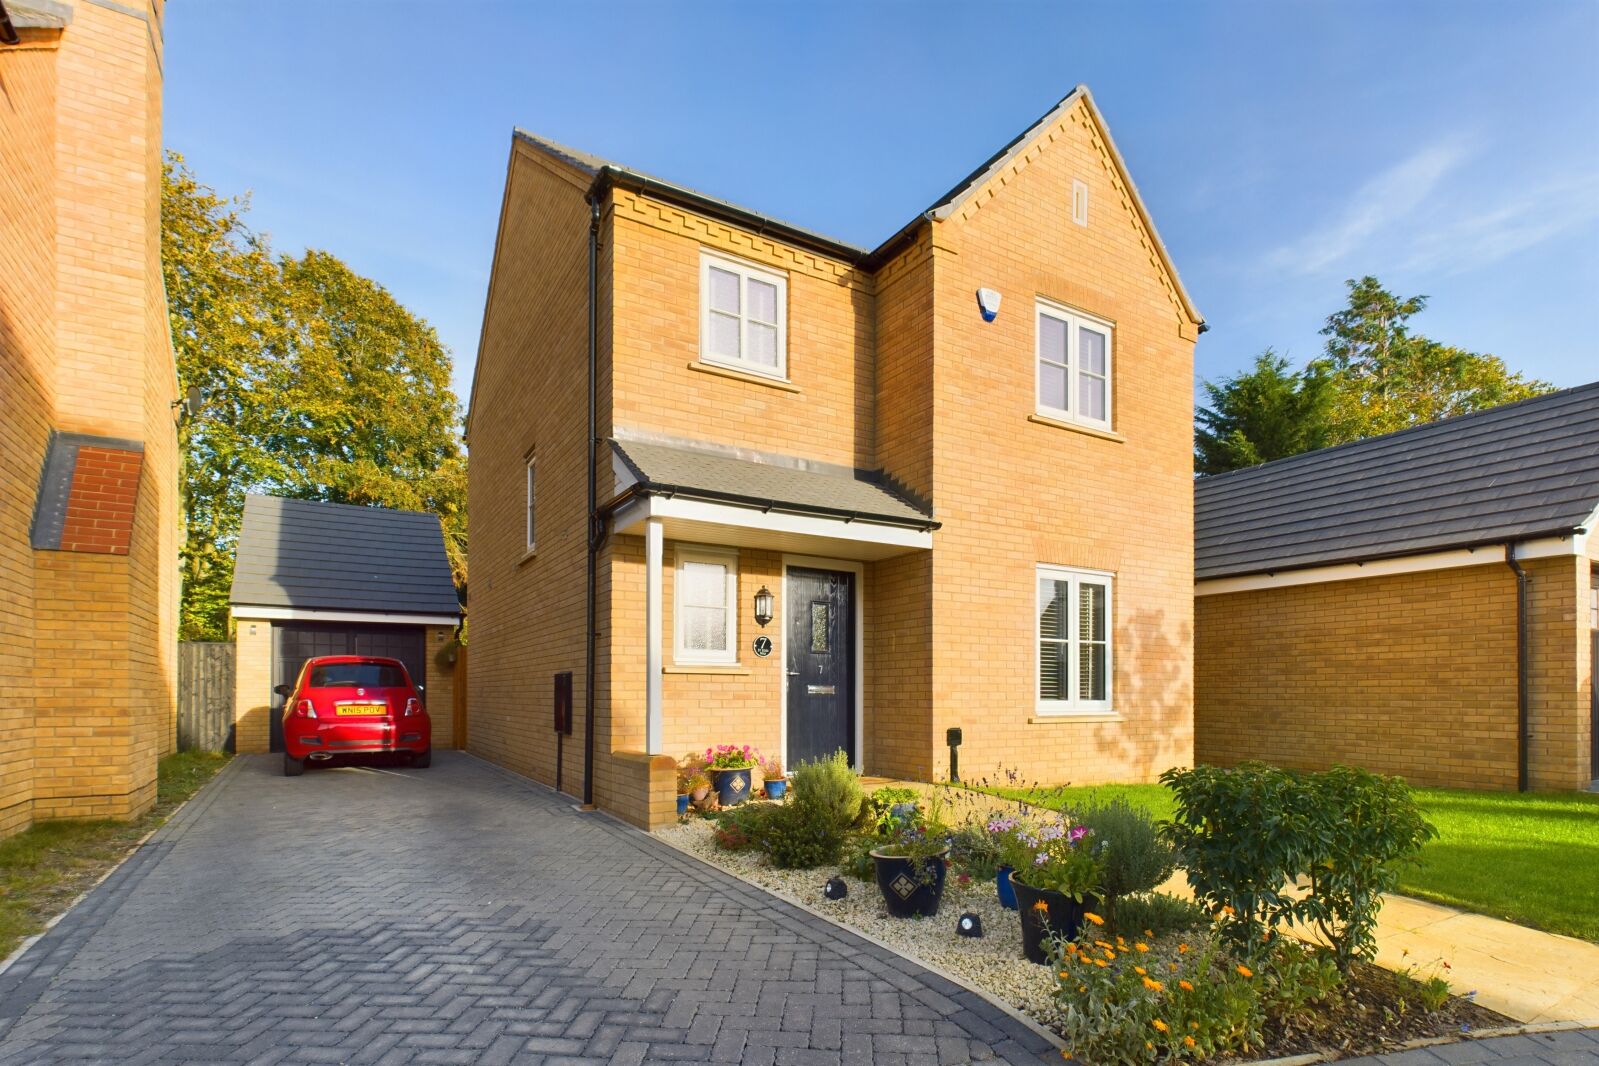 3 bedroom detached house for sale St. Edes Way, Gamlingay, SG19, main image